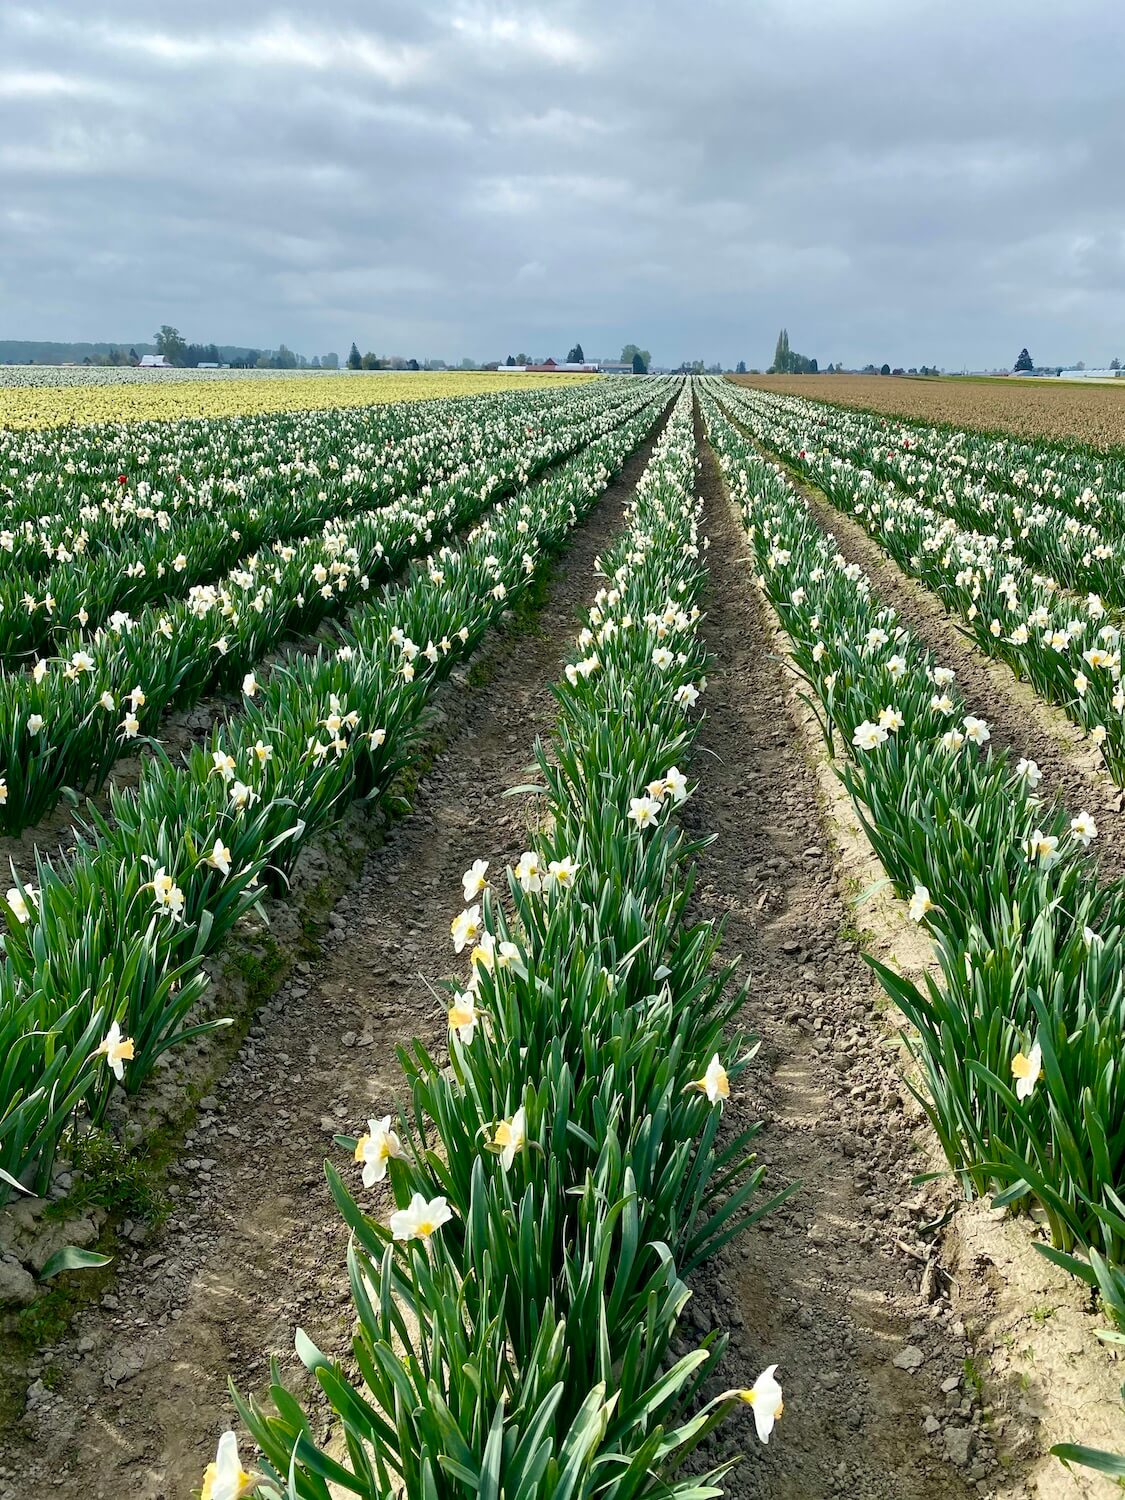 Row of daffodils in the Skagit Valley near La Conner, Washington shows the vast fields of flowers in the region.  The rows of flowers are on mounds of dirt and the texture of green narrow leaves are mixed with white blooms. 